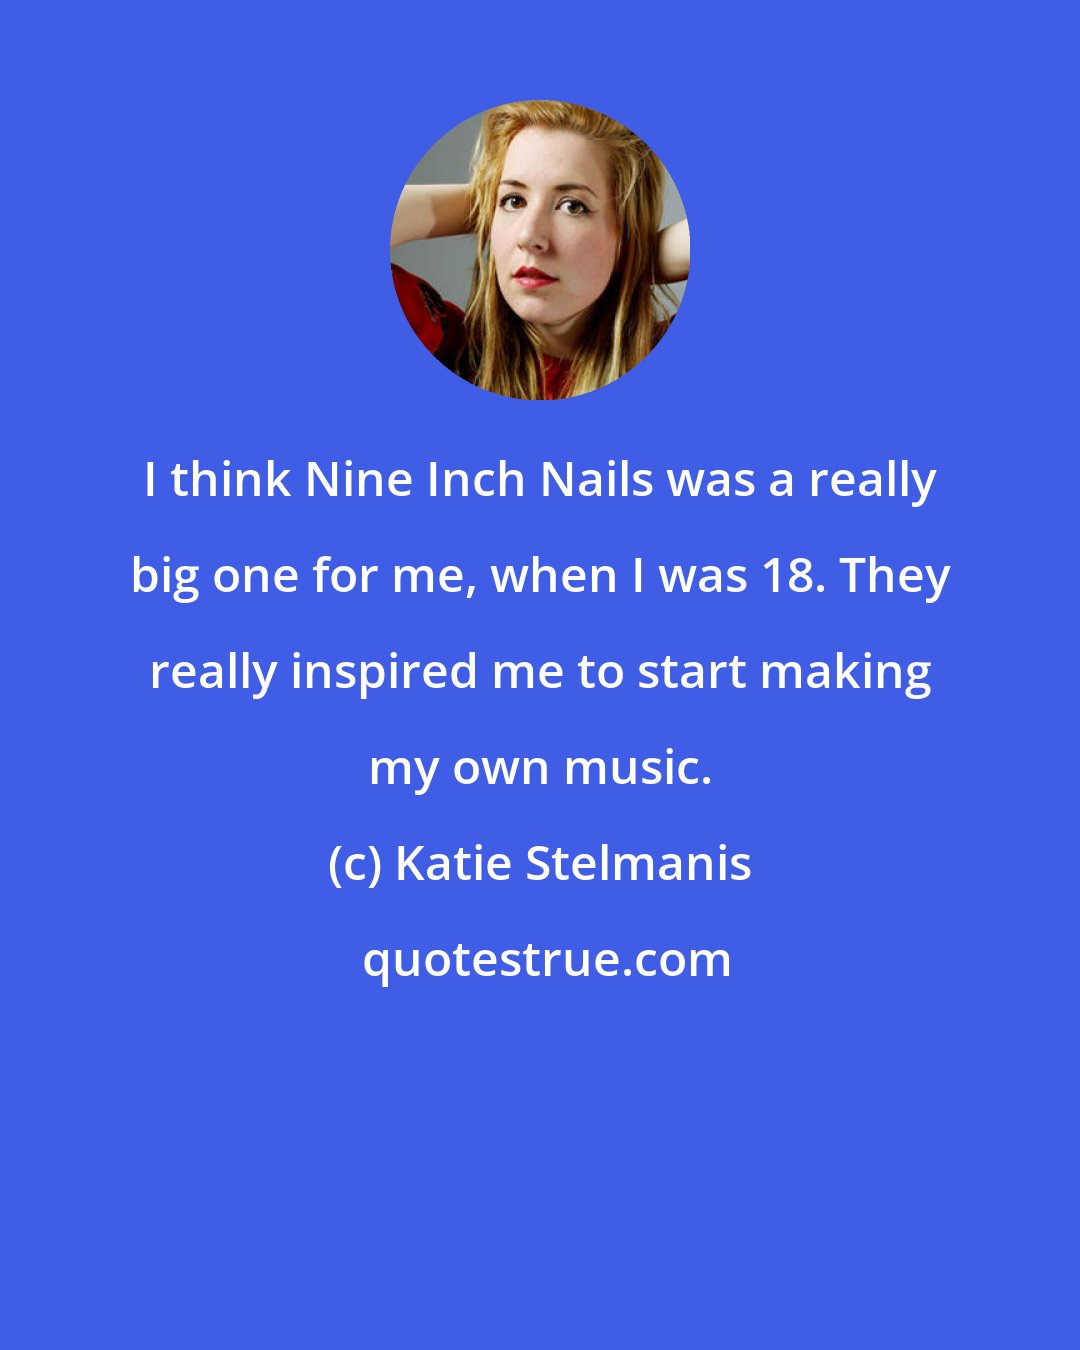 Katie Stelmanis: I think Nine Inch Nails was a really big one for me, when I was 18. They really inspired me to start making my own music.